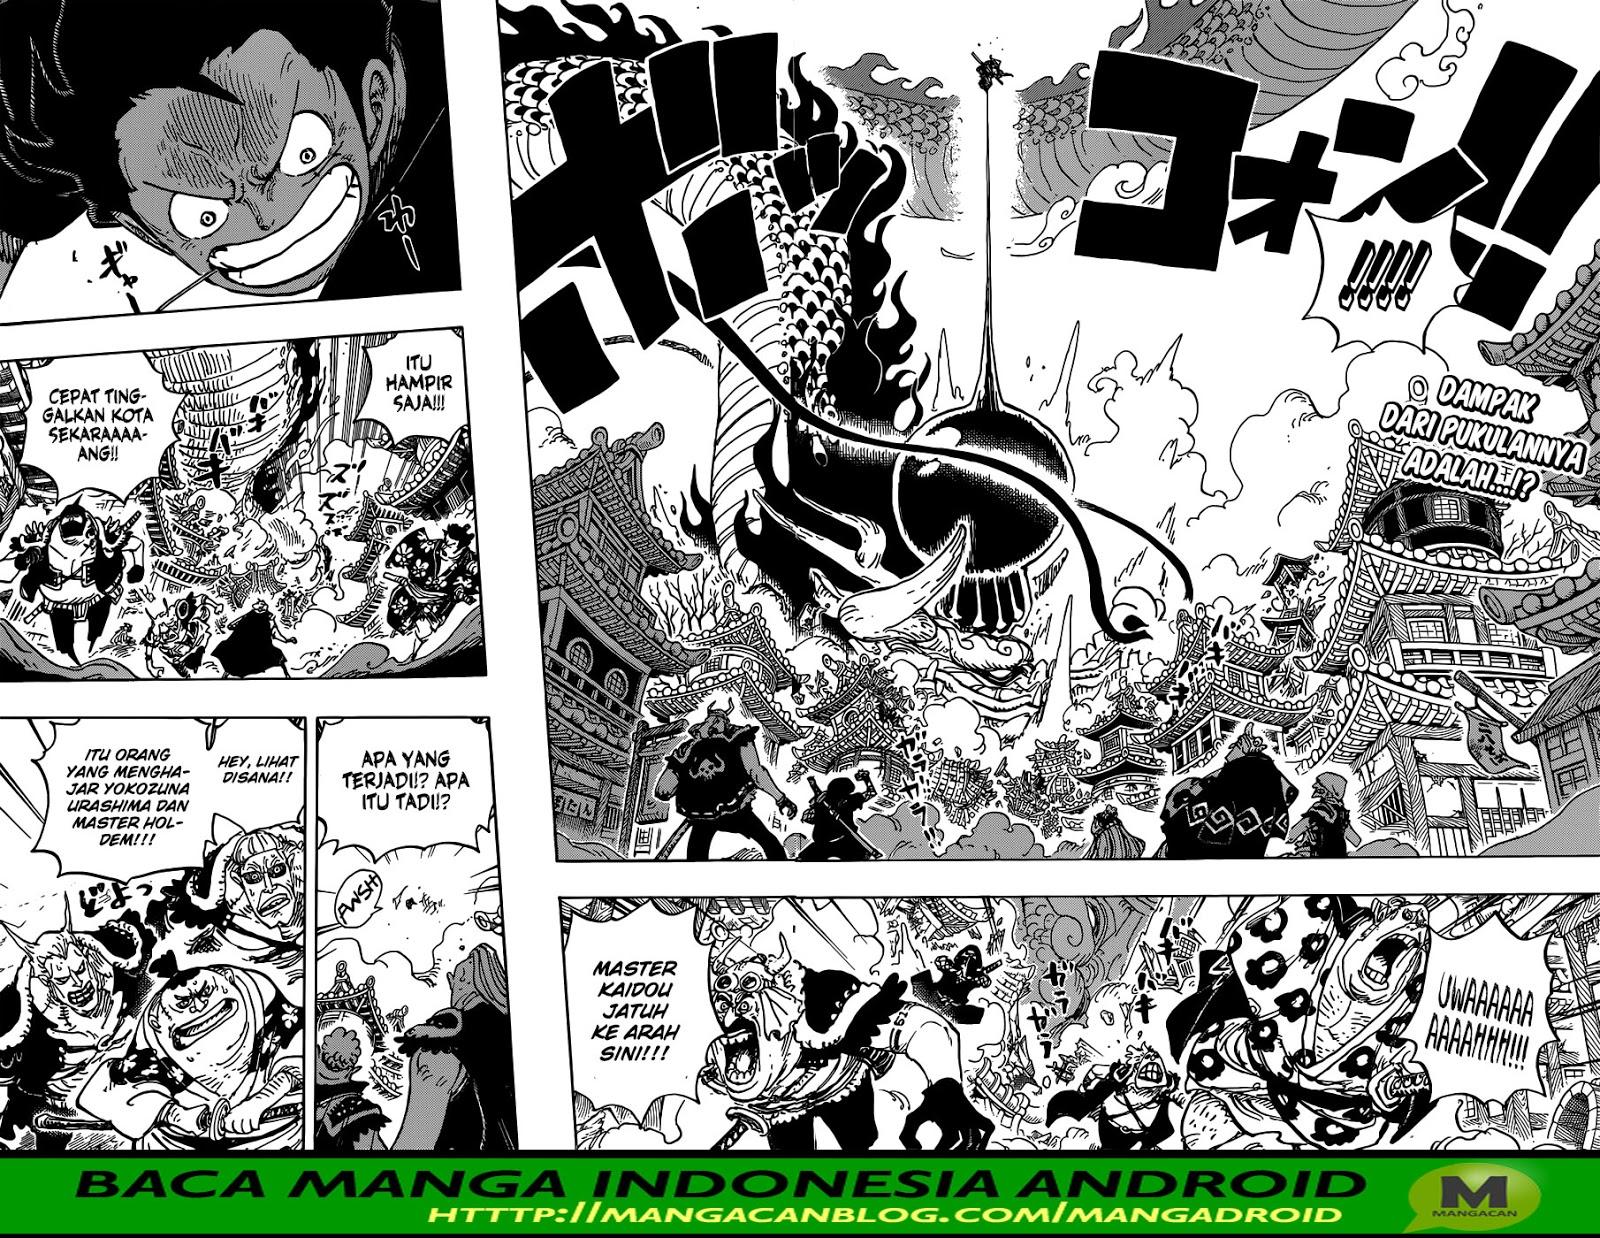 One Piece Chapter 923